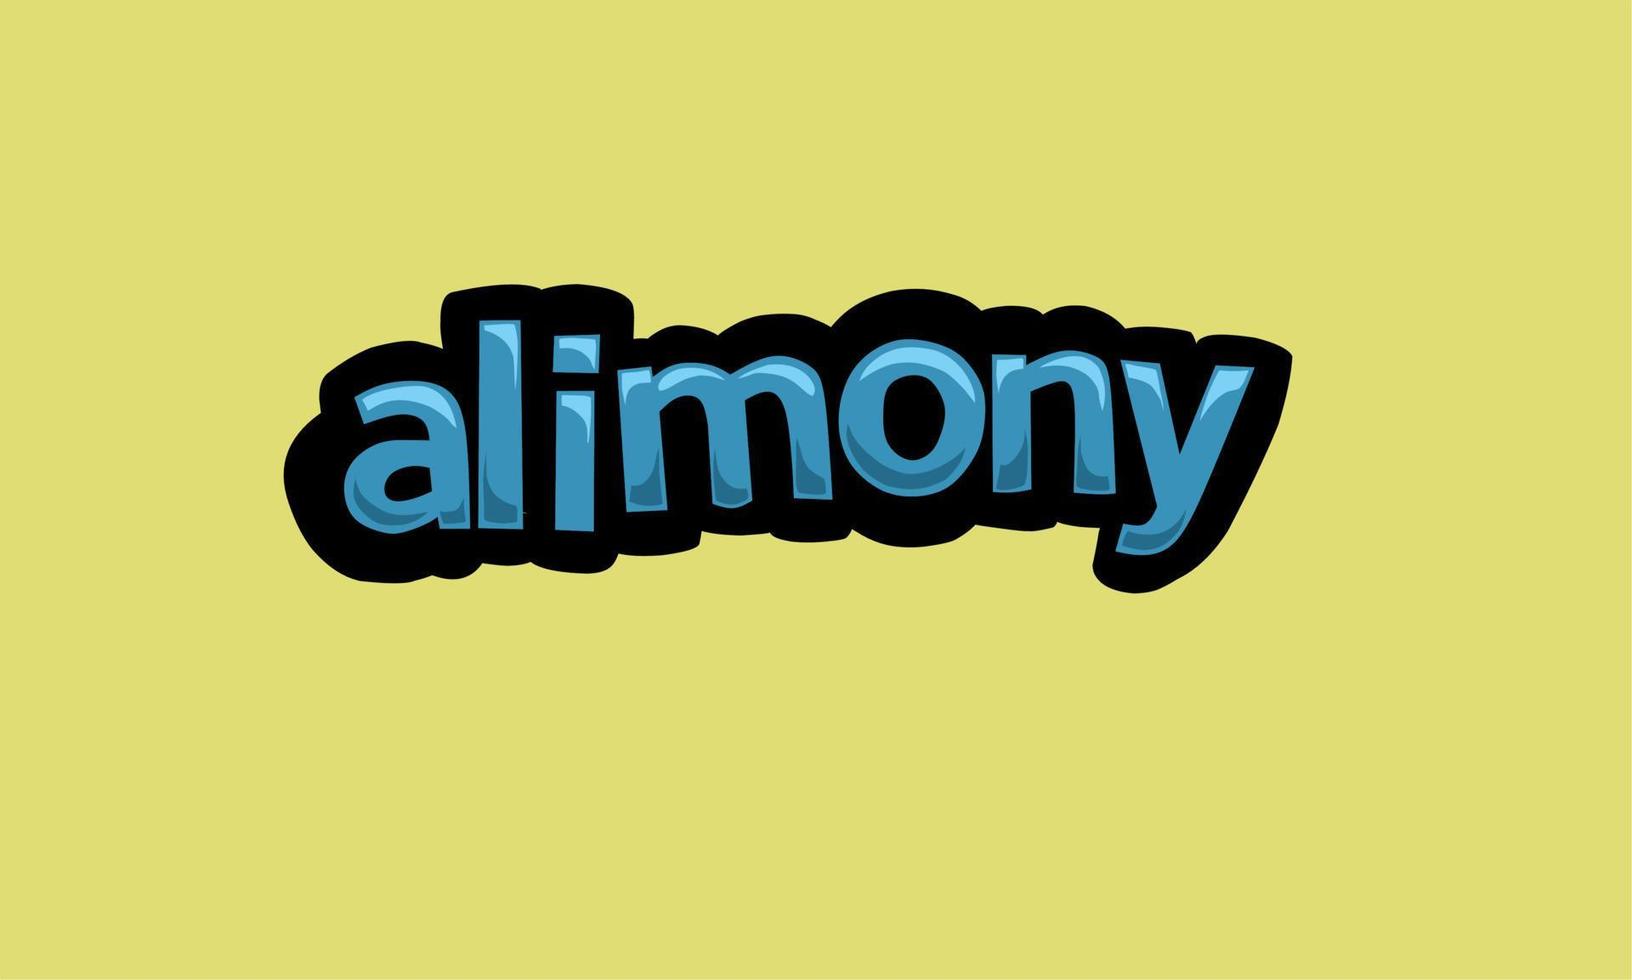 ALIMONY writing vector design on a yellow background